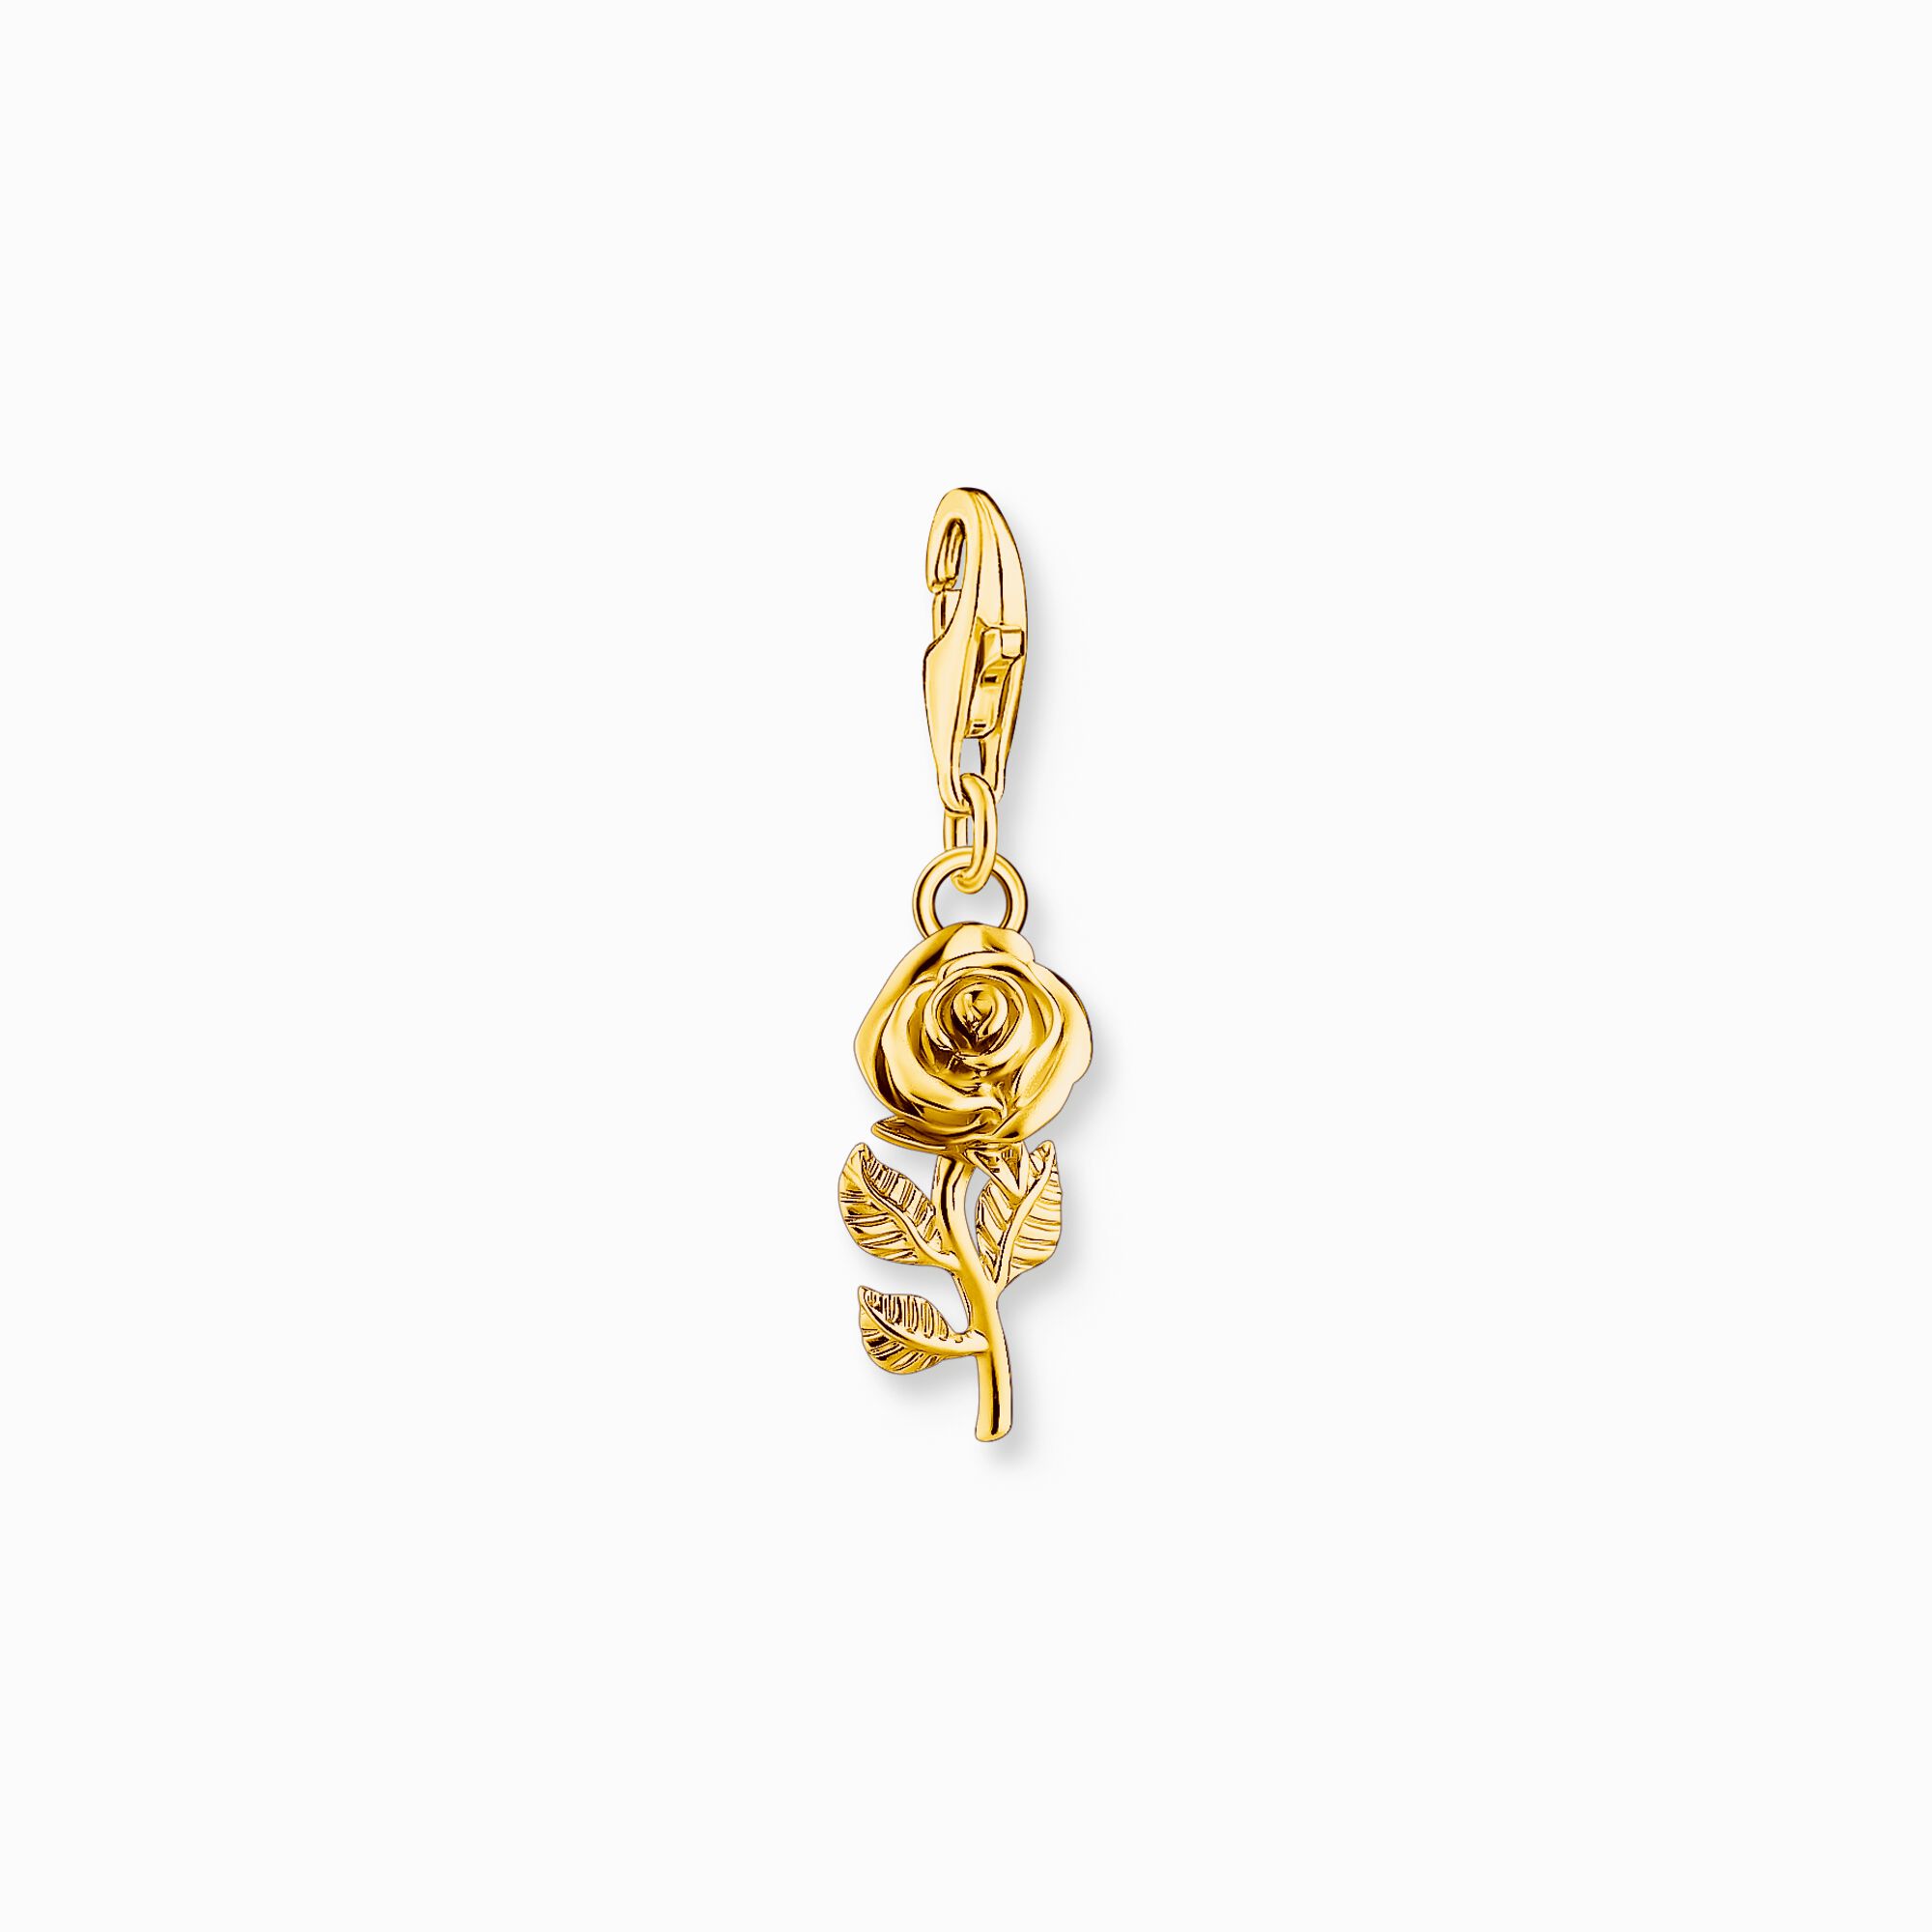 Gold-plated charm pendant in rose design from the Charm Club collection in the THOMAS SABO online store